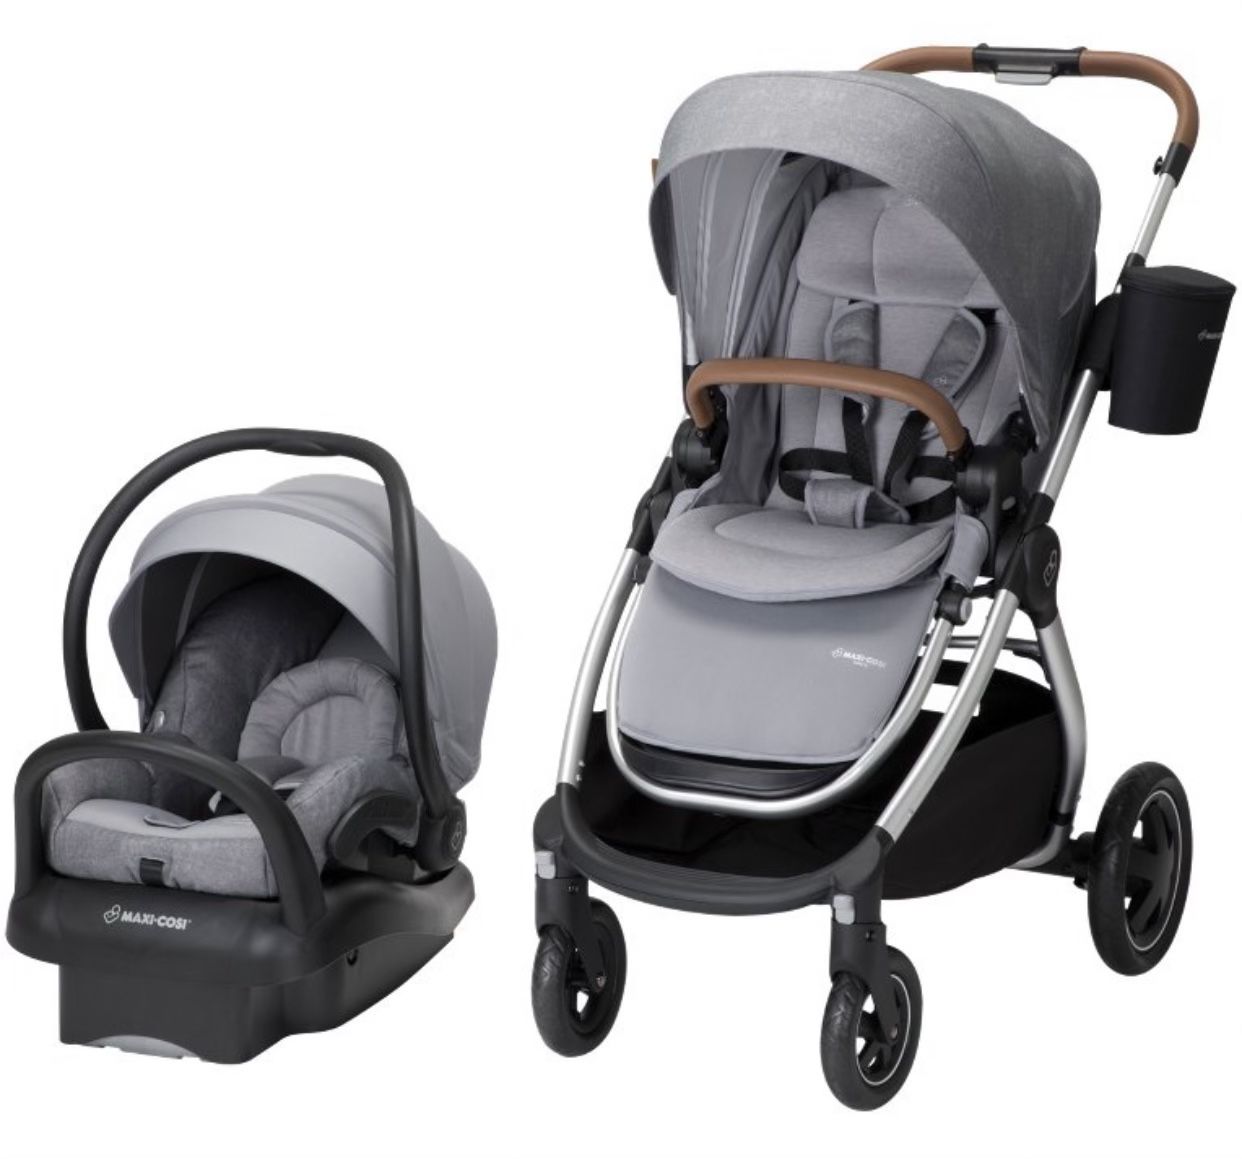 New in factory box Maxi-Cosi Adorra 2.0 5-in-1 Modular Travel System with Mico Max 30 Infant Car Seat and Base, Nomad Grey 